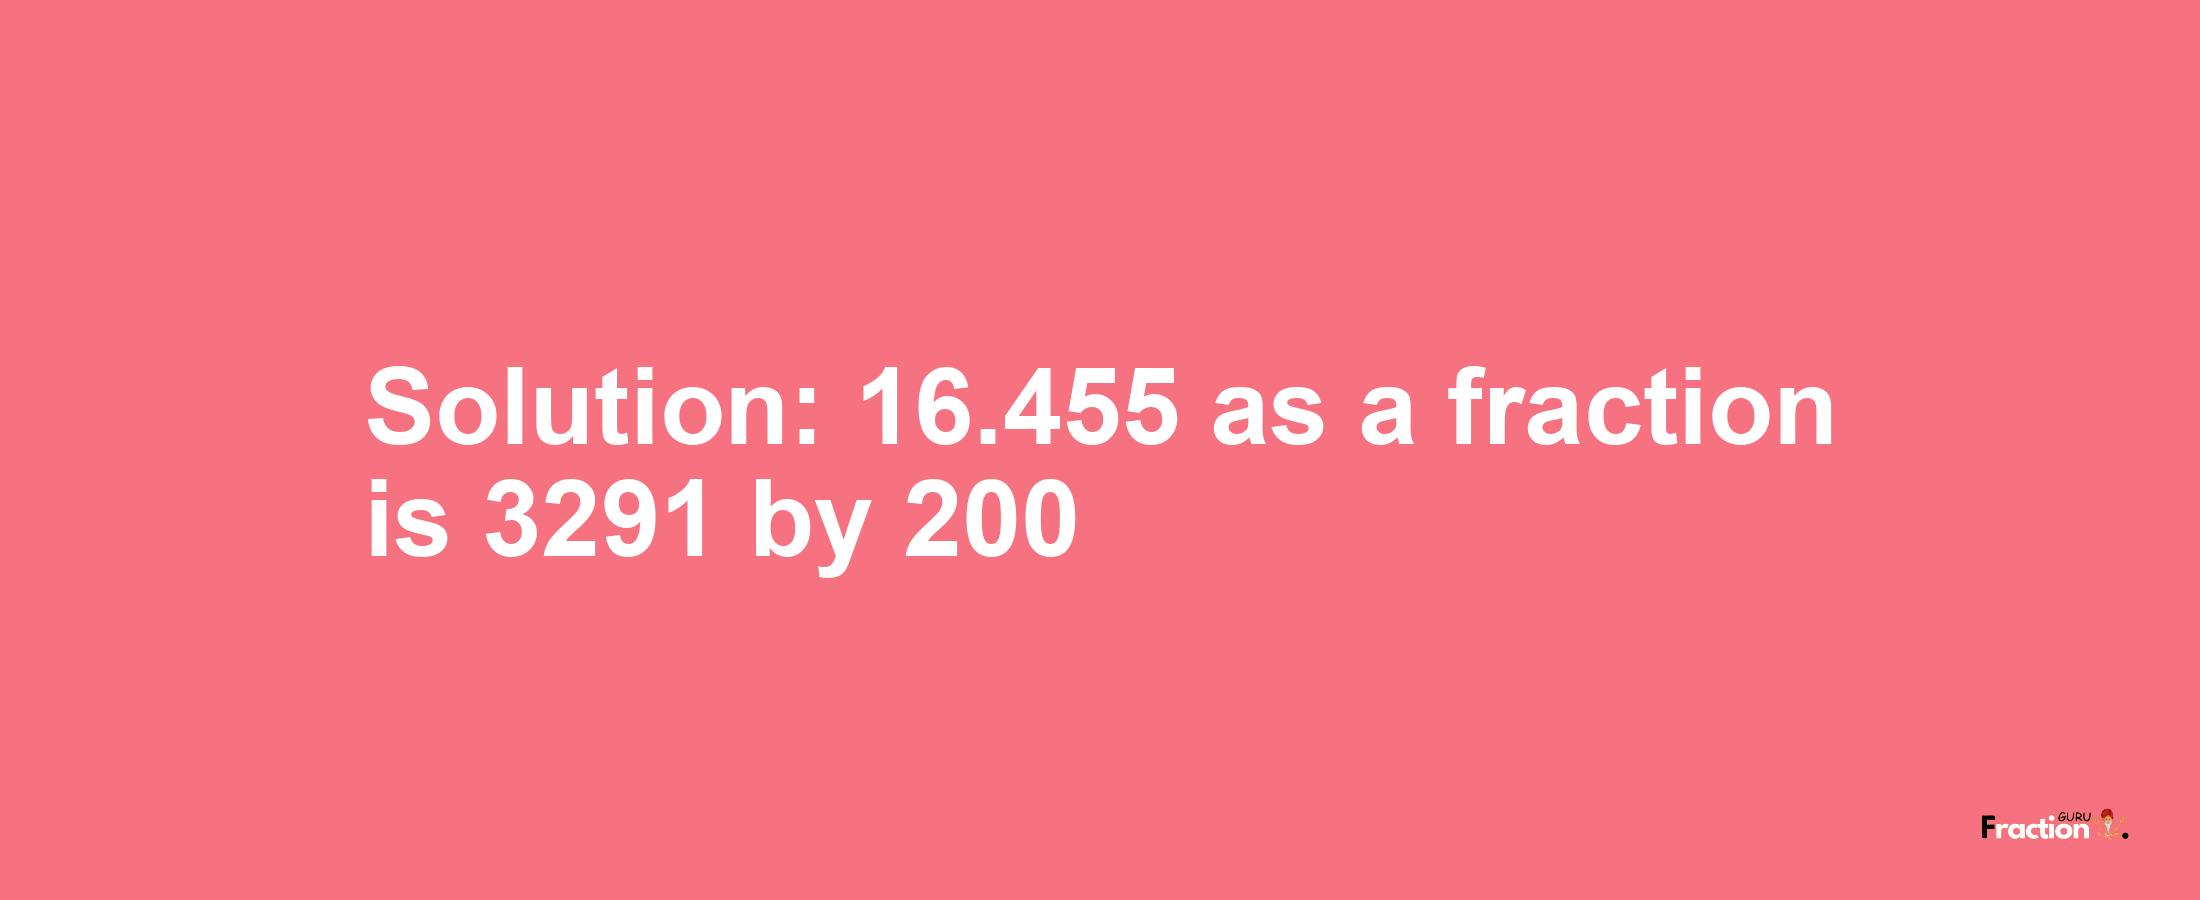 Solution:16.455 as a fraction is 3291/200